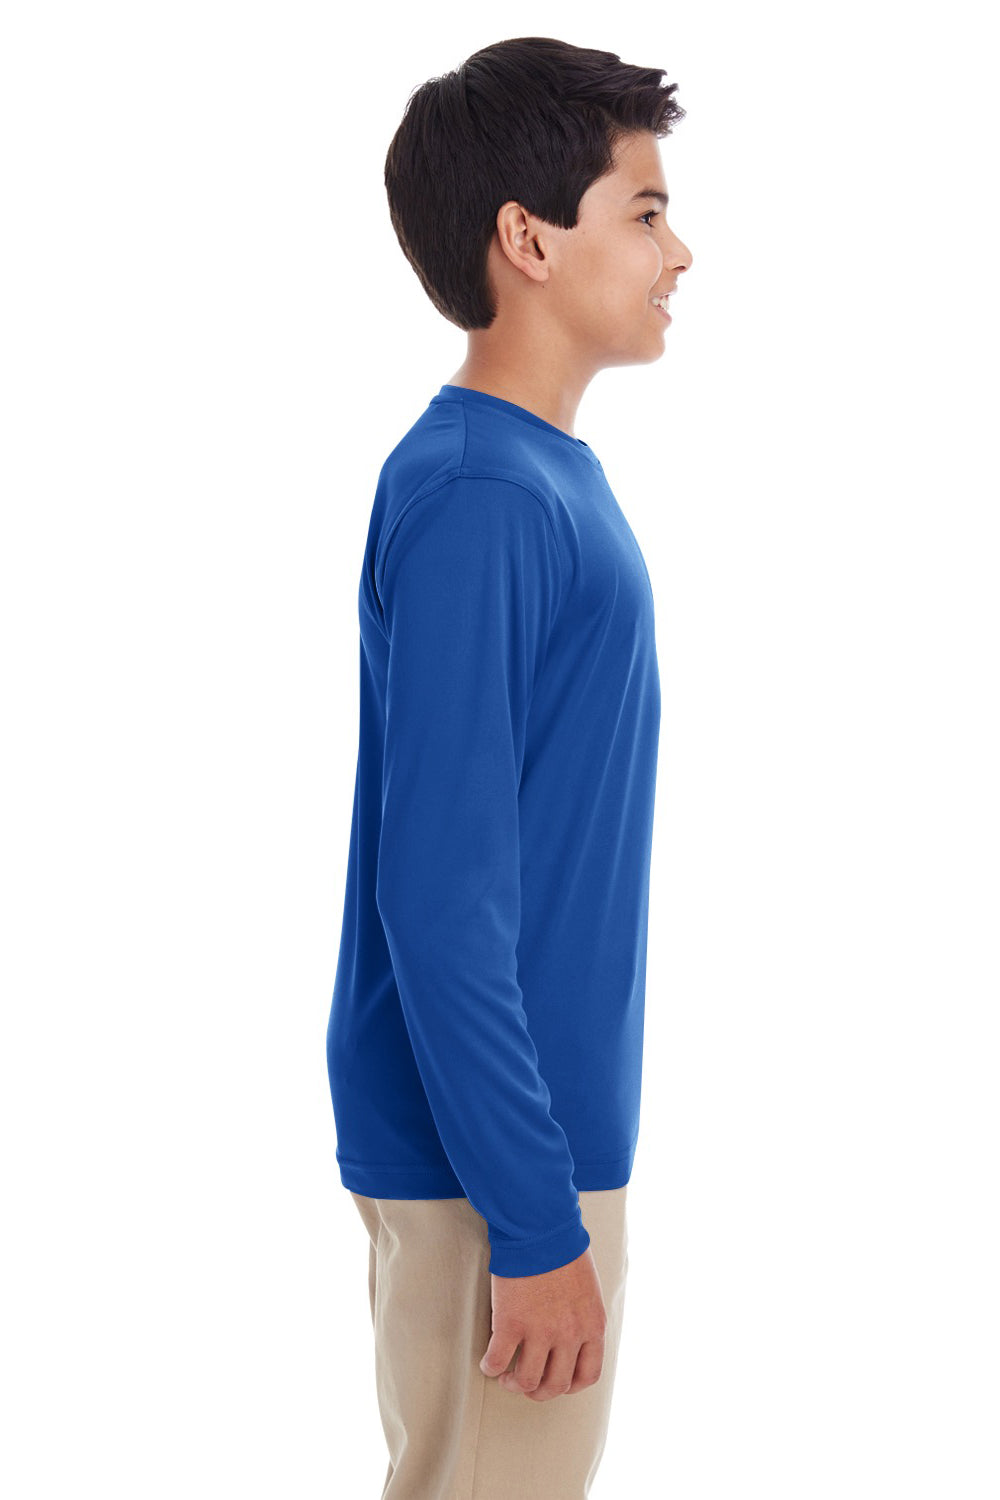 UltraClub 8622Y Youth Cool & Dry Performance Moisture Wicking Long Sleeve Crewneck T-Shirt Royal Blue Side